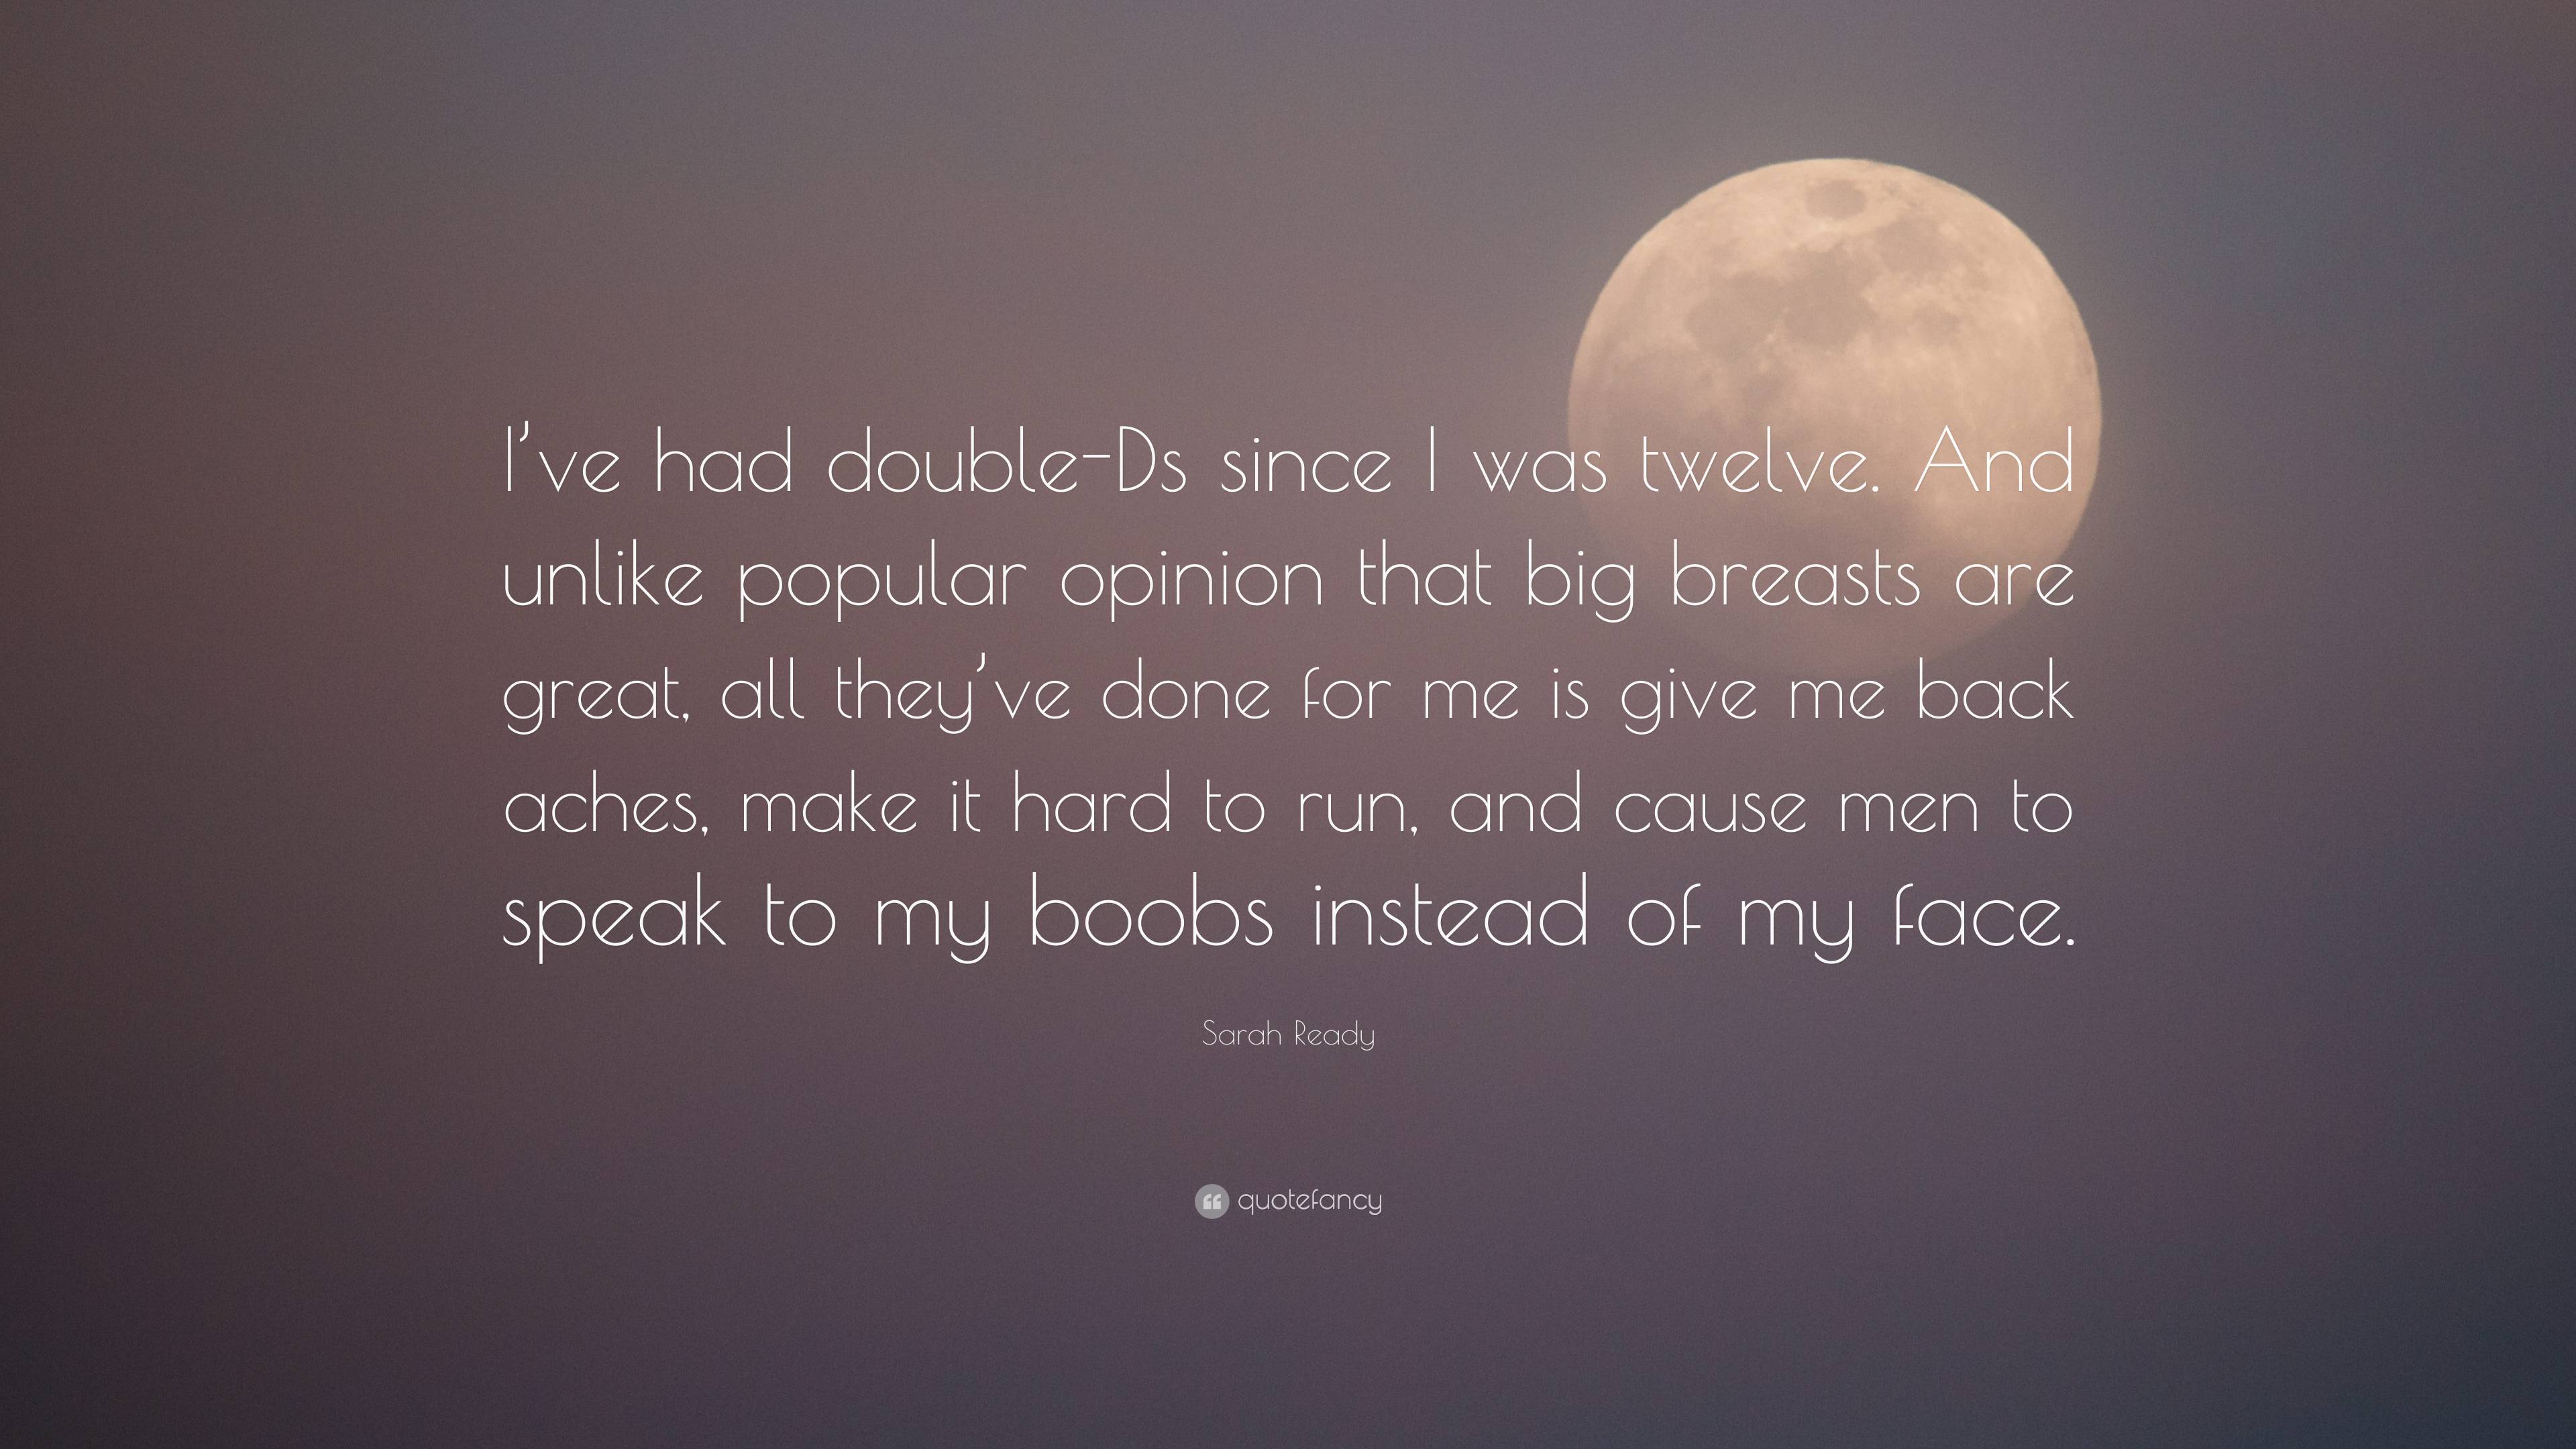 https://quotefancy.com/media/wallpaper/3840x2160/7376249-Sarah-Ready-Quote-I-ve-had-double-Ds-since-I-was-twelve-And-unlike.jpg